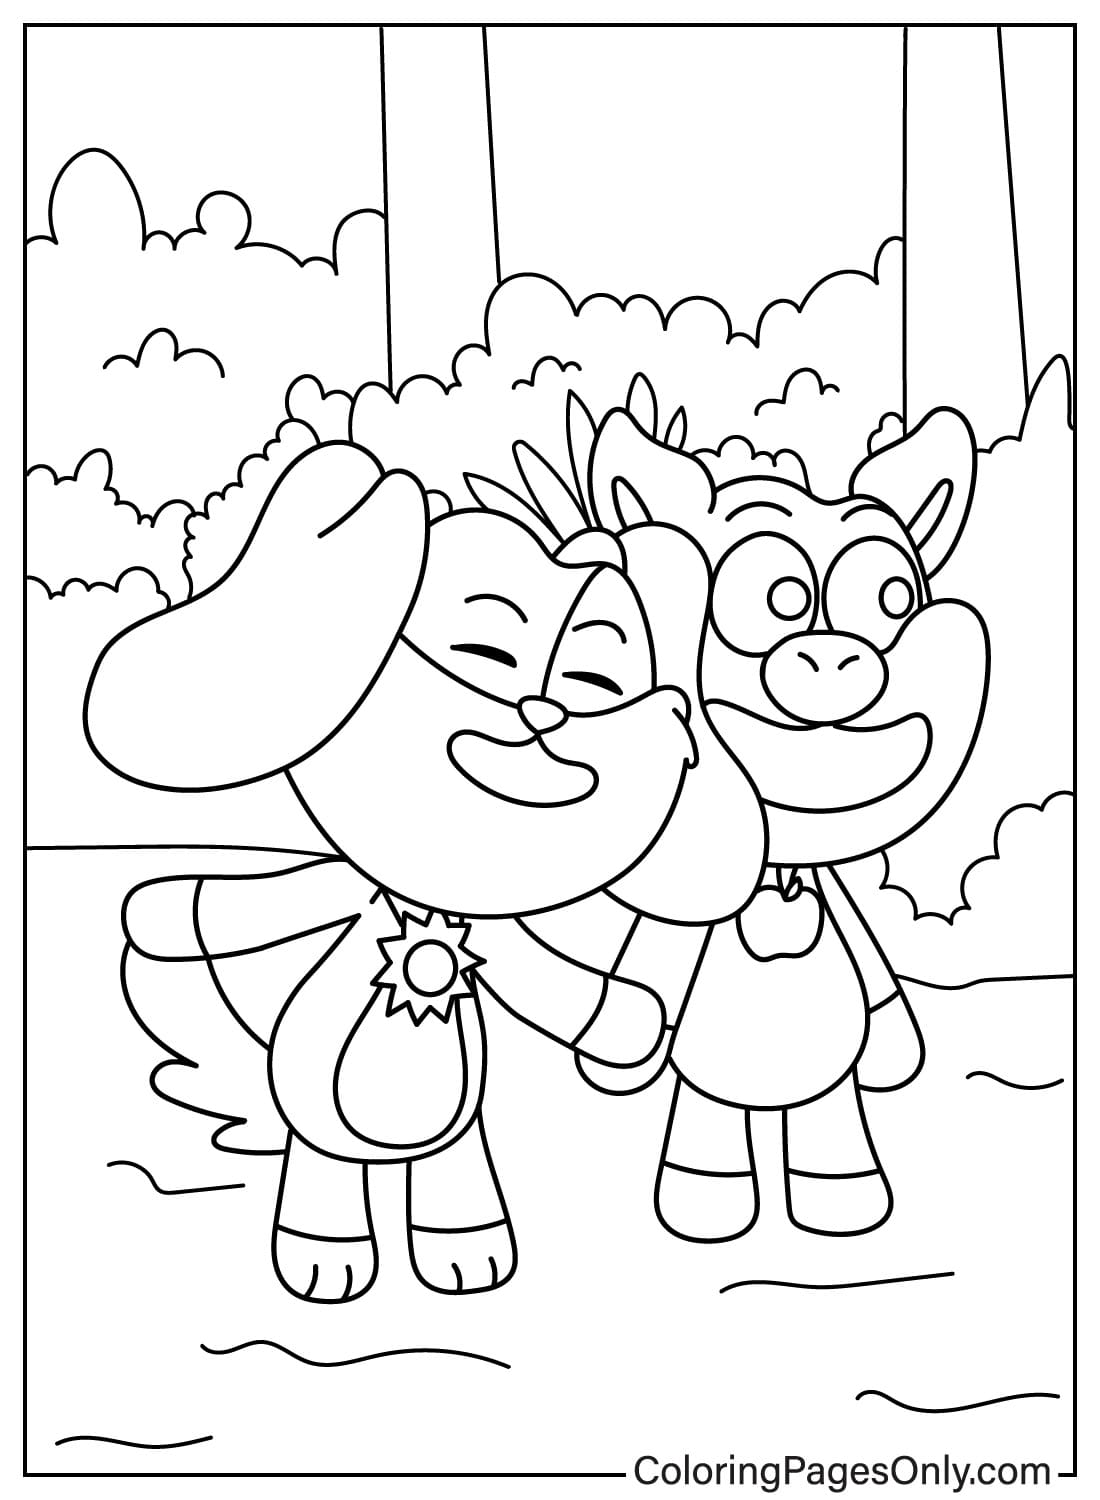 DogDay, PickyPiggy Coloring Page from DogDay